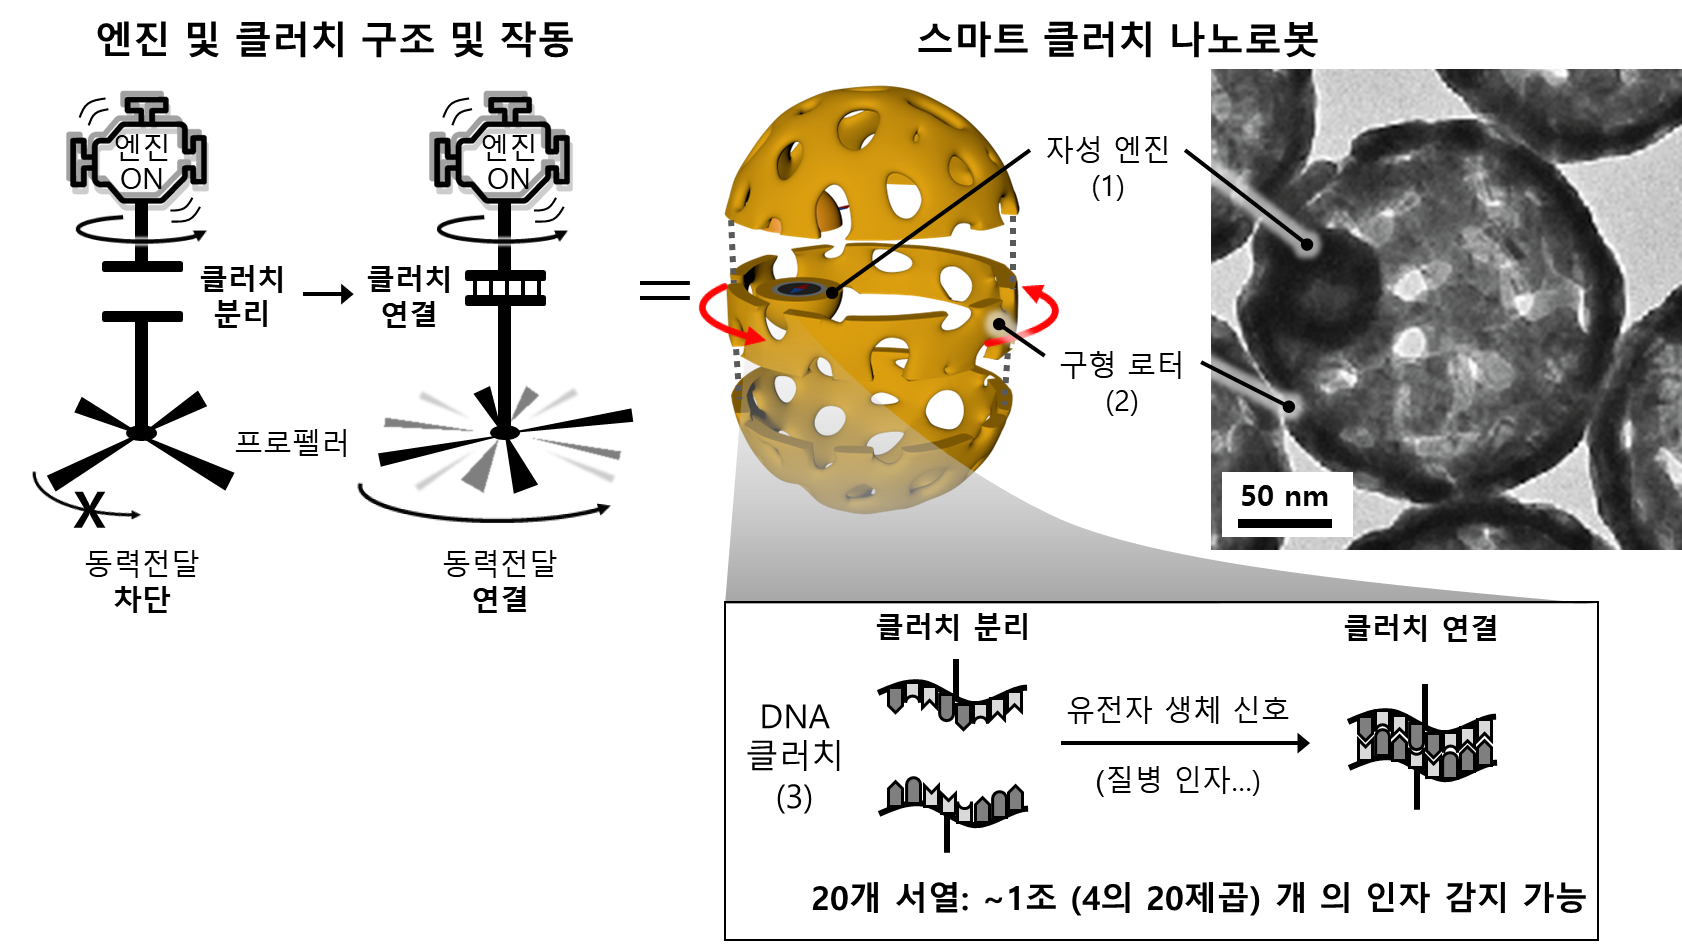 [Figure 3] Structure and operation principle of the smart clutch nanorobot. The clutch nanorobot consists of an engine, rotor, and clutch, with the genetic clutch composed of 20 base sequences capable of encoding nearly infinite (4 to the power of 20) amount of information.